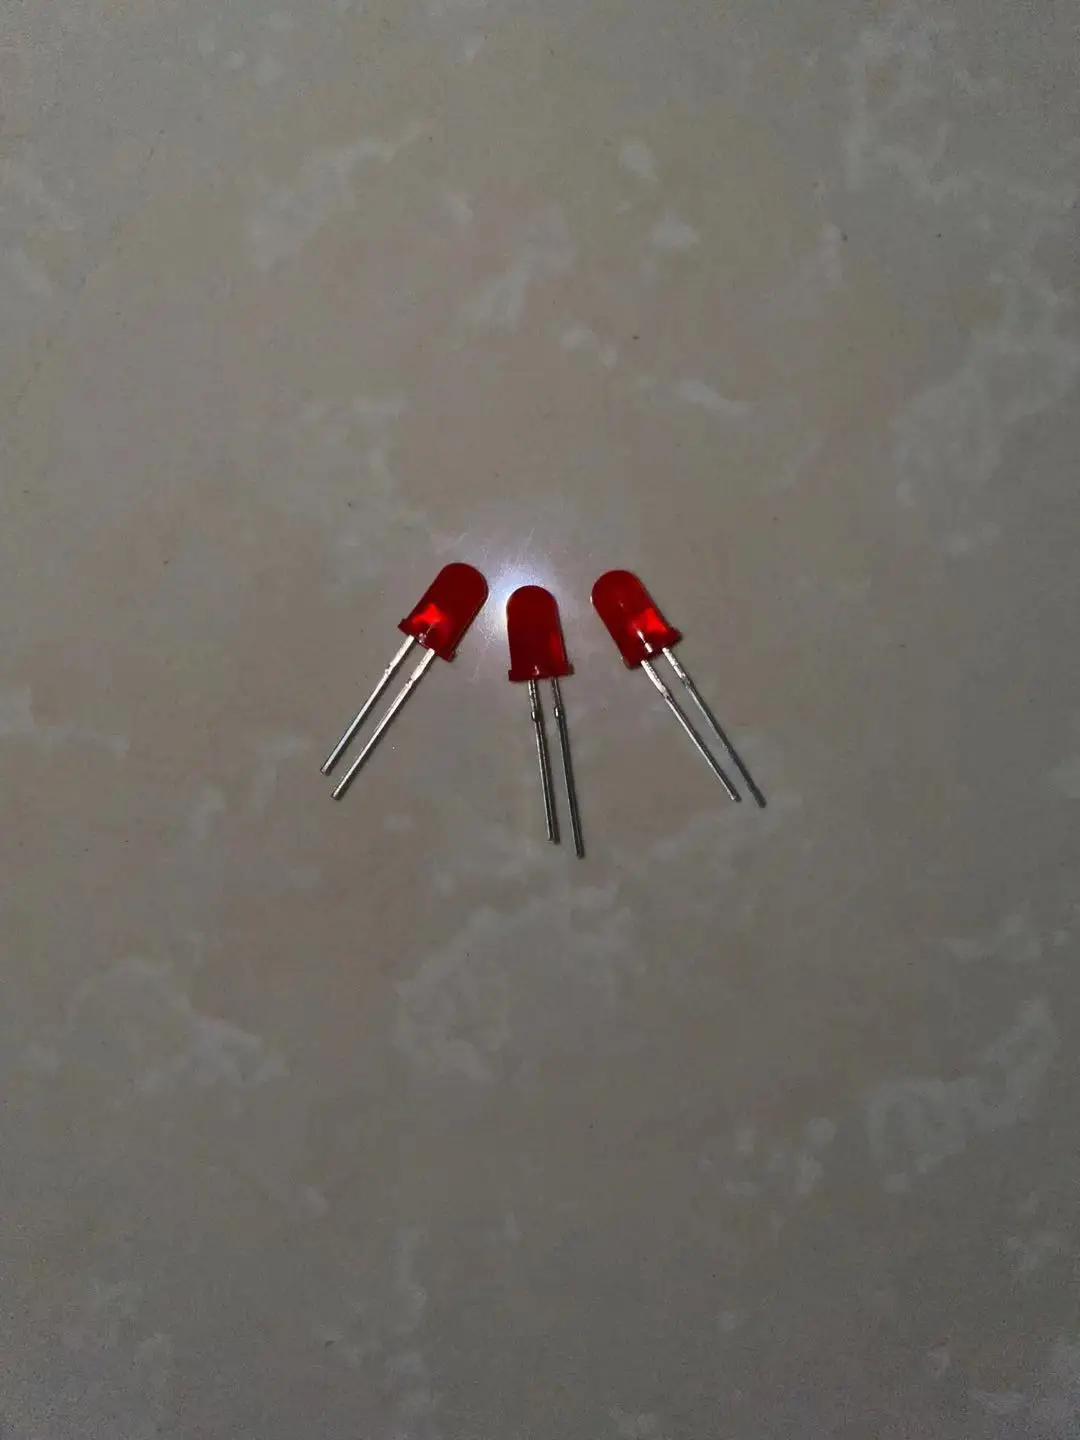 
wuxi led displays 3mm led 5mm transparent and diffused led diode 